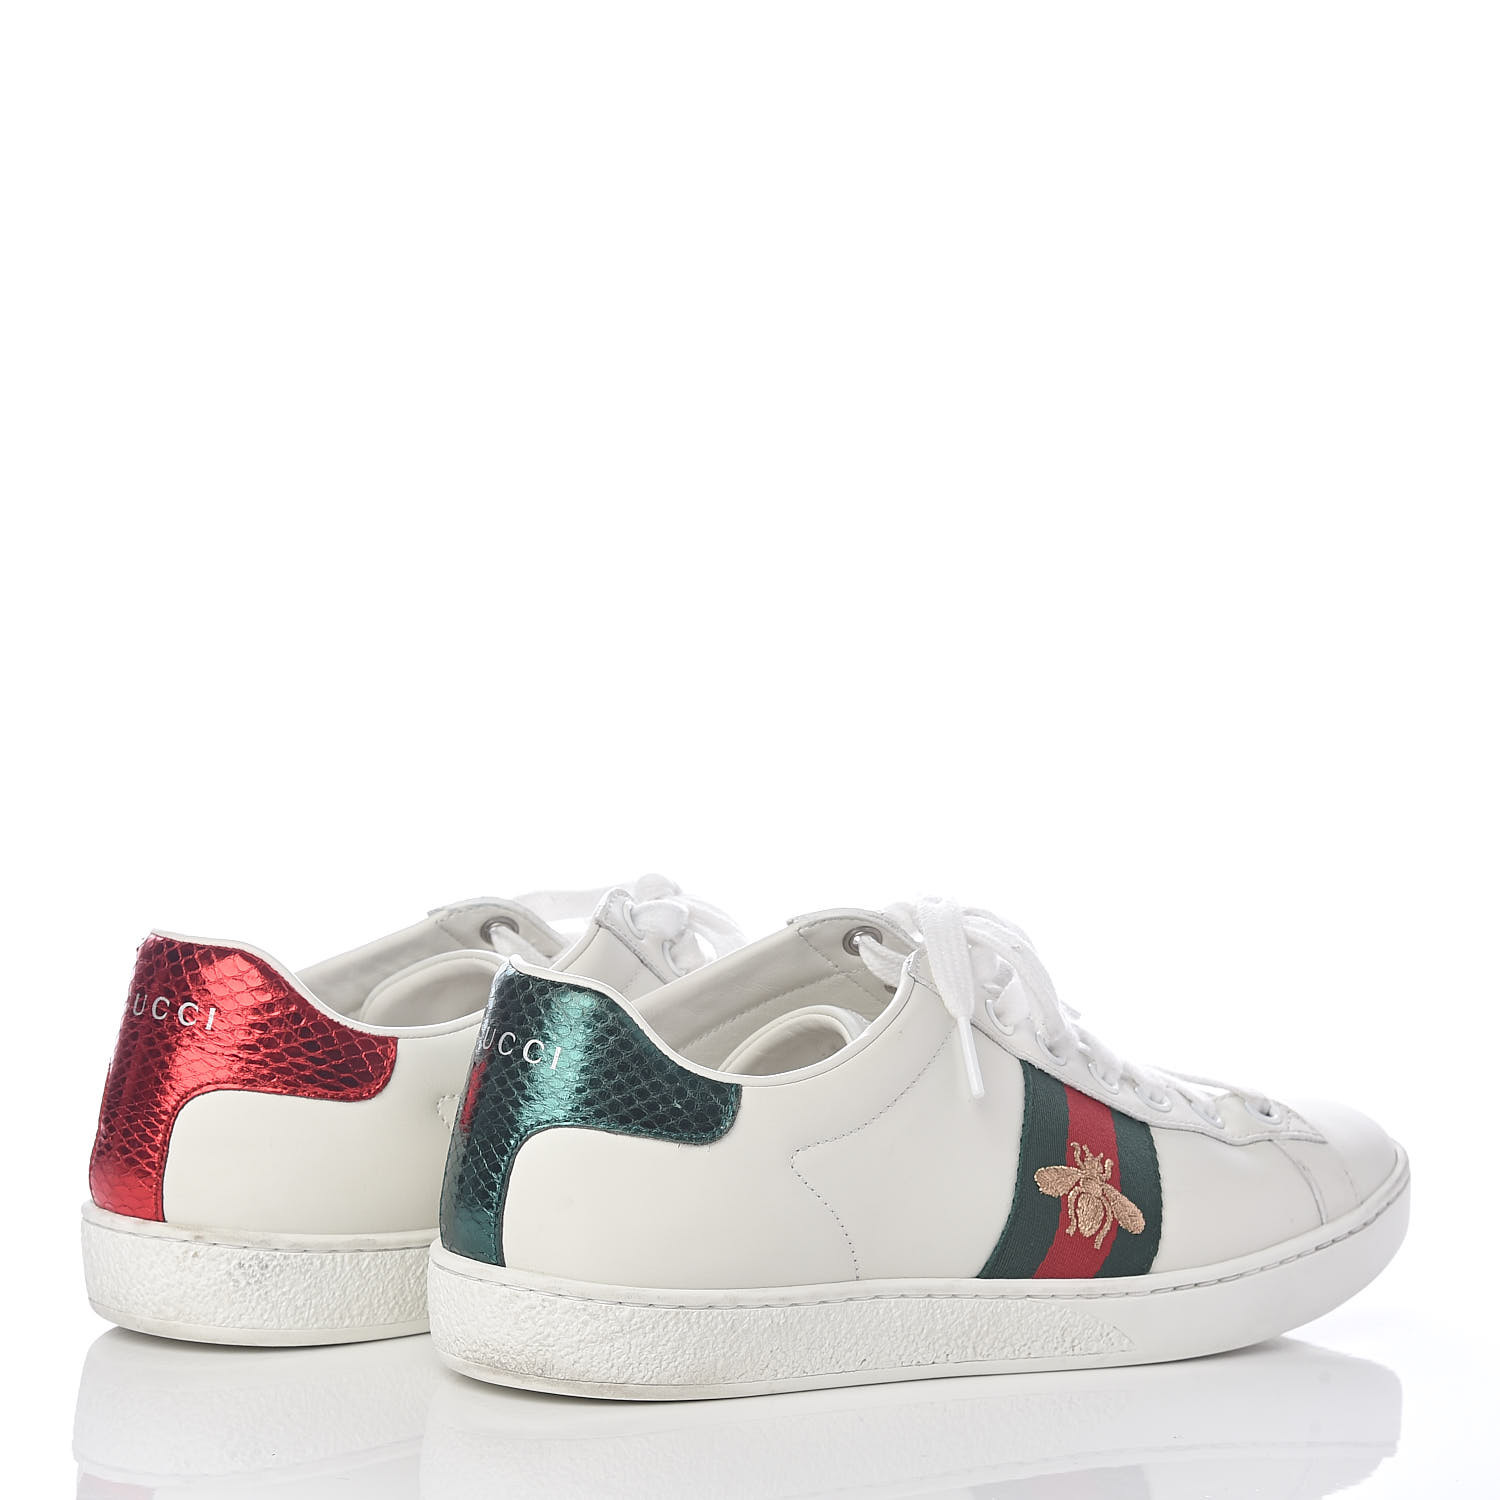 GUCCI Calfskin Ayers Embroidered Womens Ace Bee Sneakers 39 White Green 531734